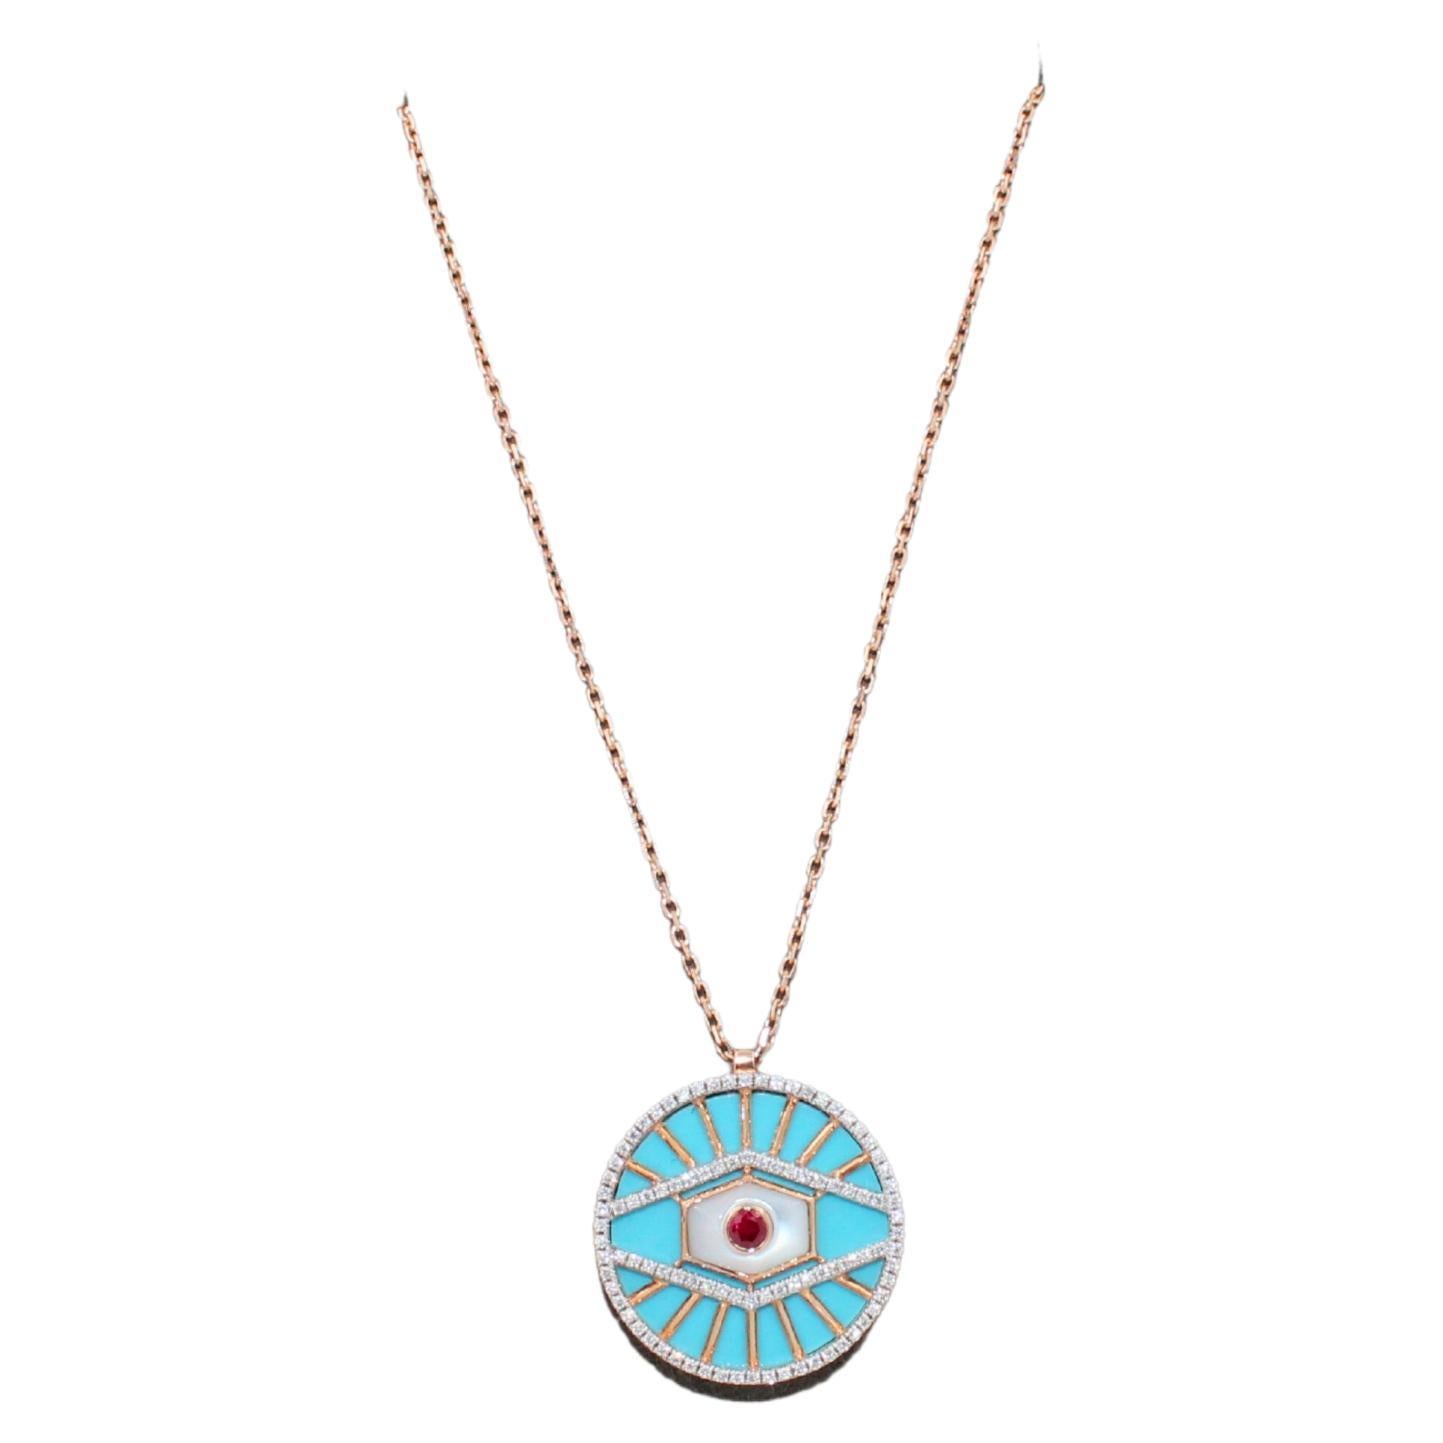 Diamond Halo Evil Eye Turquoise 18K Rose Gold Pendant Charm Medallion Necklace
Turquoise Gemstone (Around 5 Carats)
Mother of Pearl 
0.40 cts Diamonds
0.20 cts Ruby
Adjustable 18K Rose Gold chain 16-20 inches 
20MM Diameter Medallion charm 